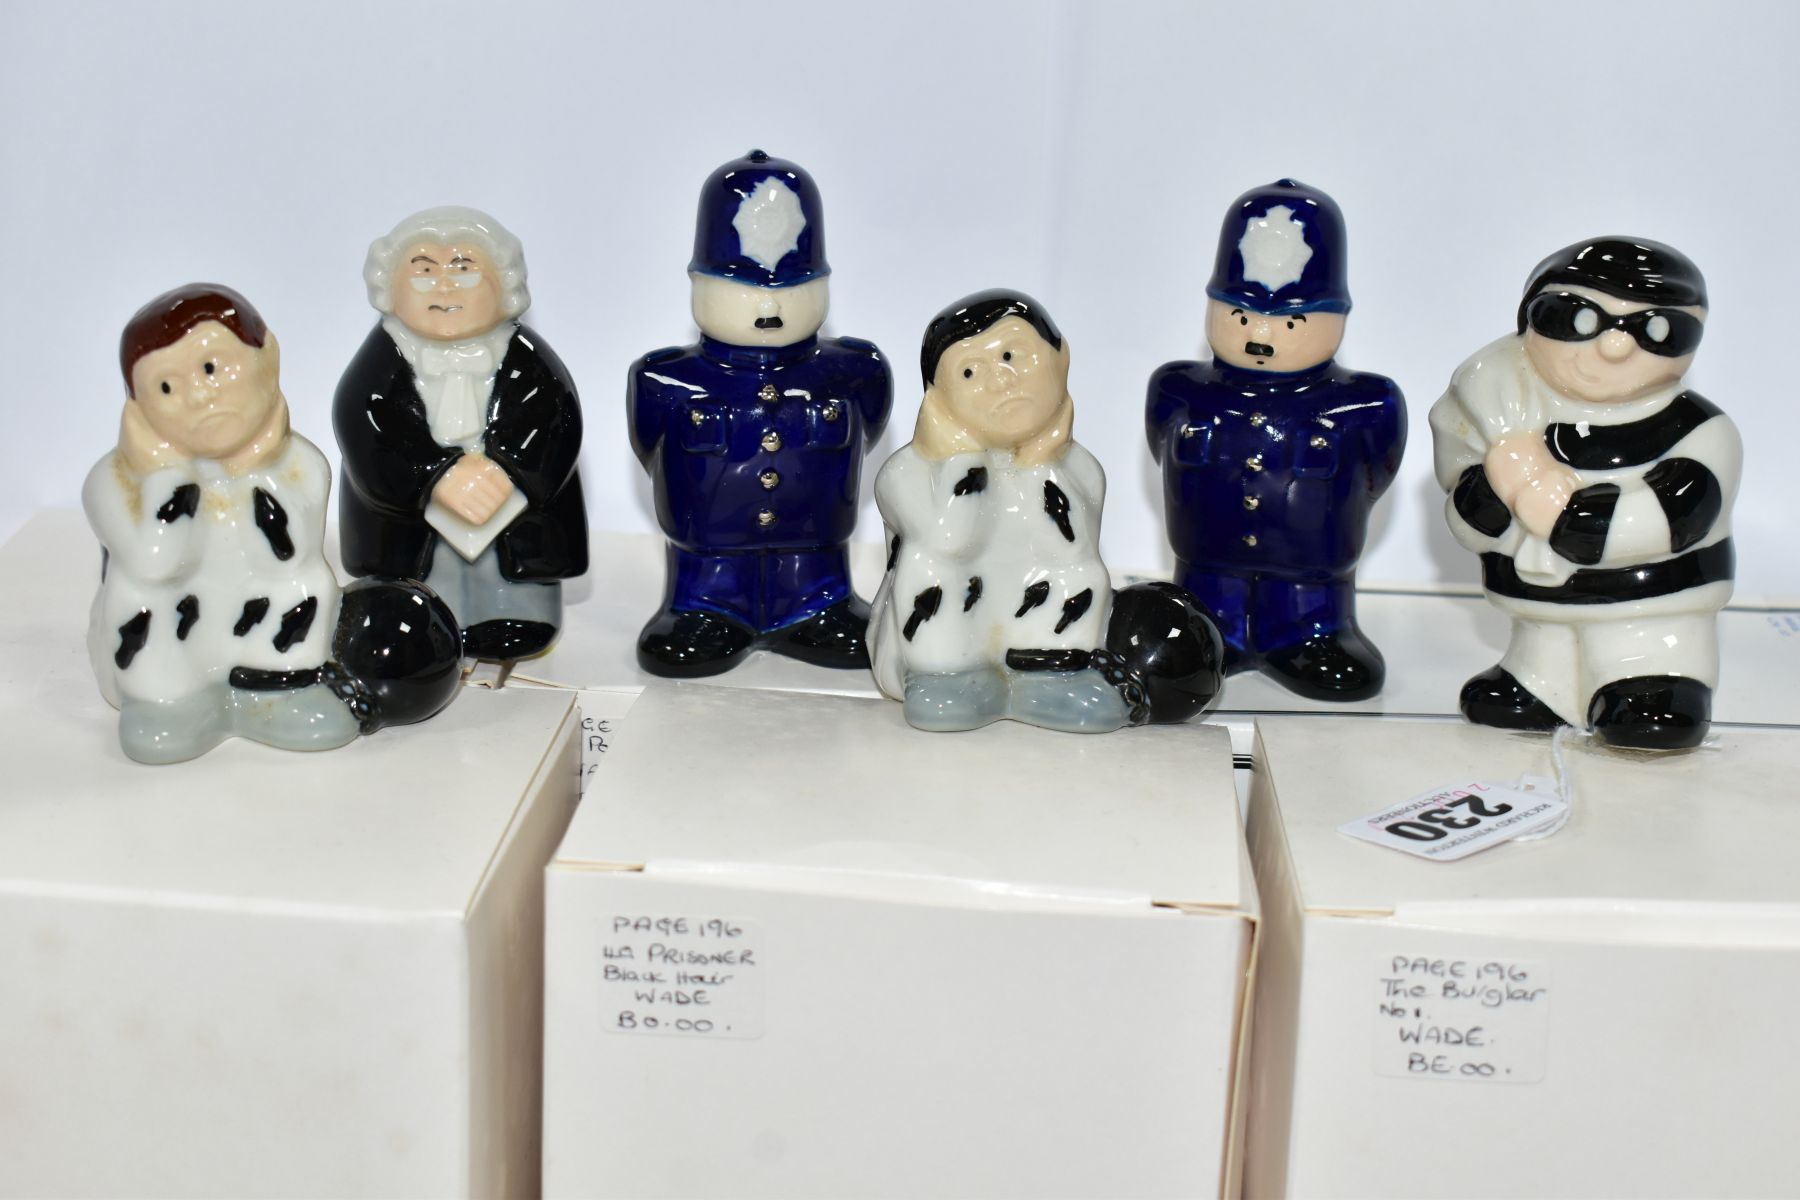 SIX BOXED WADE E AND A.CROMPTON FIGURES FROM THE LONG ARM OF THE LAW SERIES 1993-95 comprising The